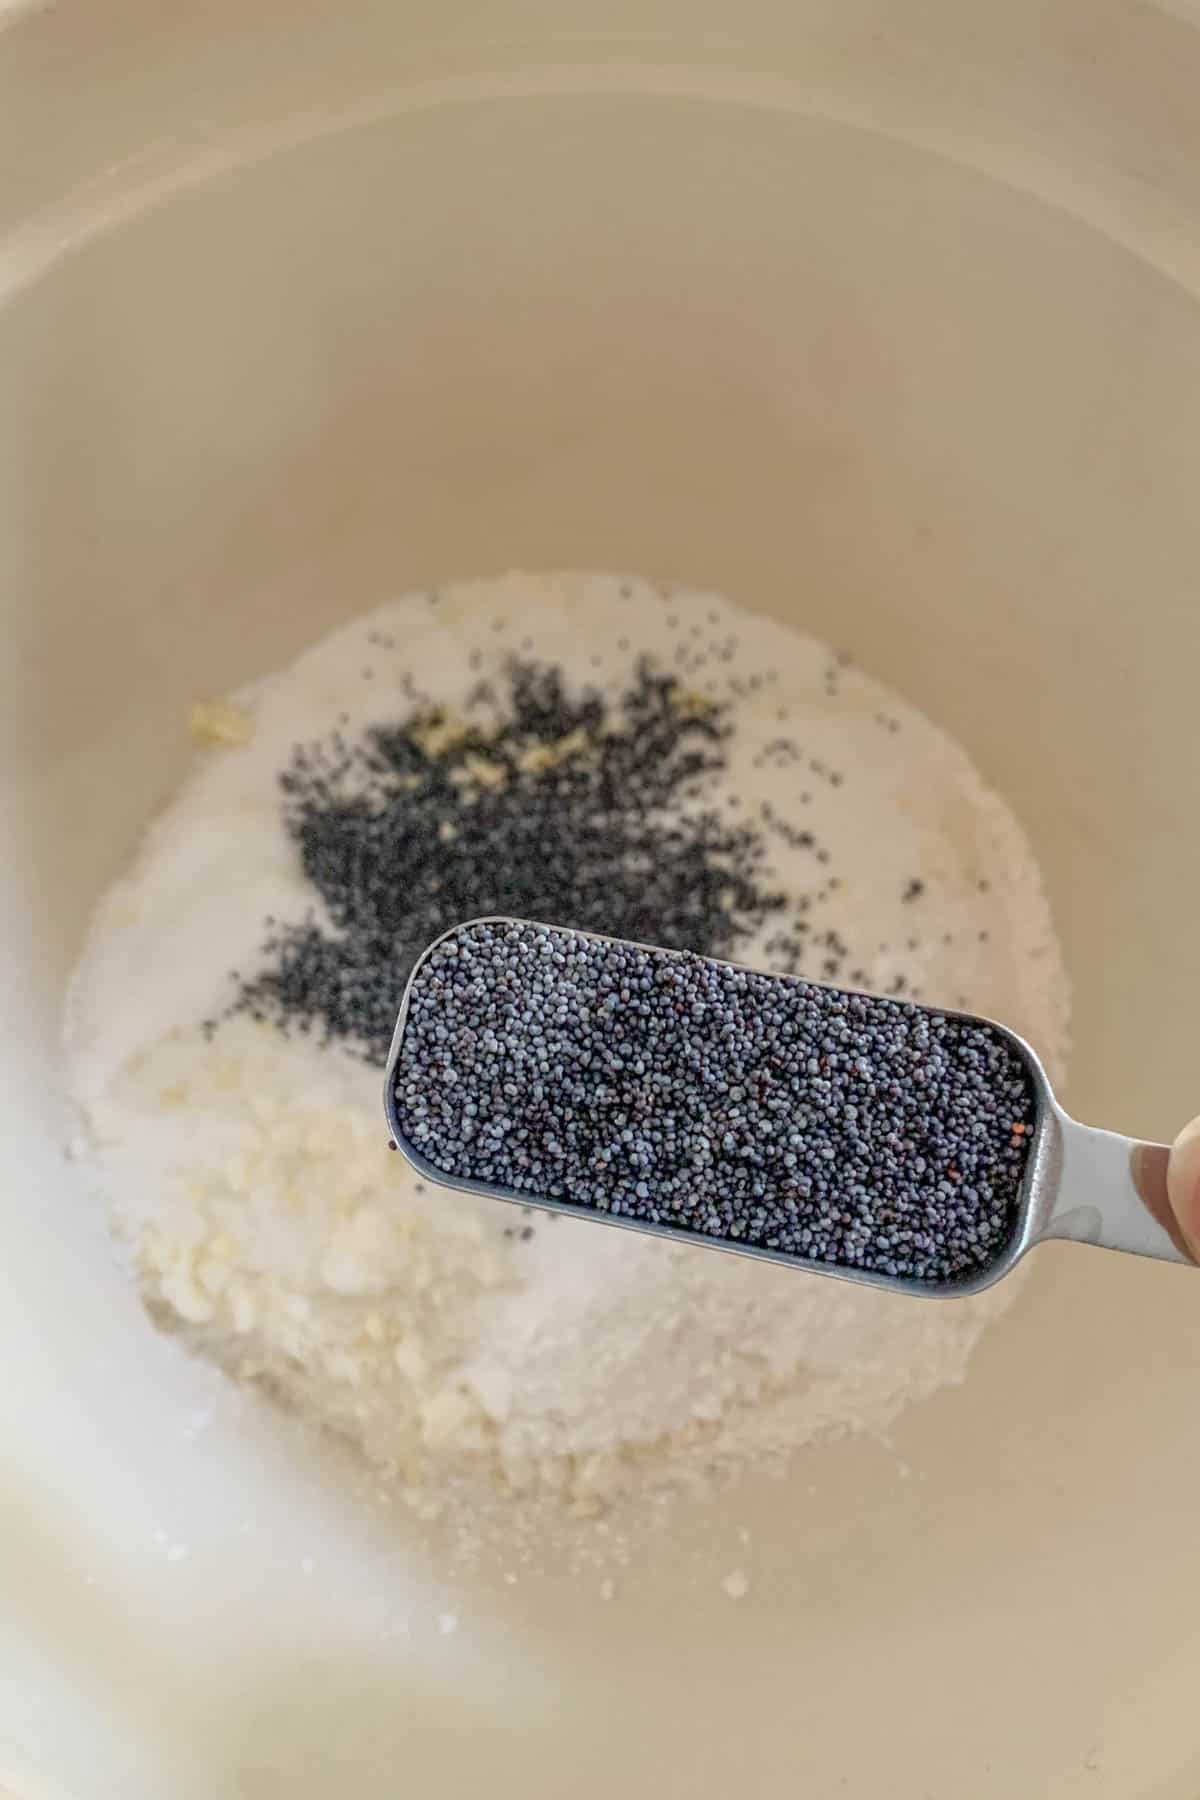 Spoonful of poppy seeds over a bowl of dry ingredients for lemon poppy seed bread.